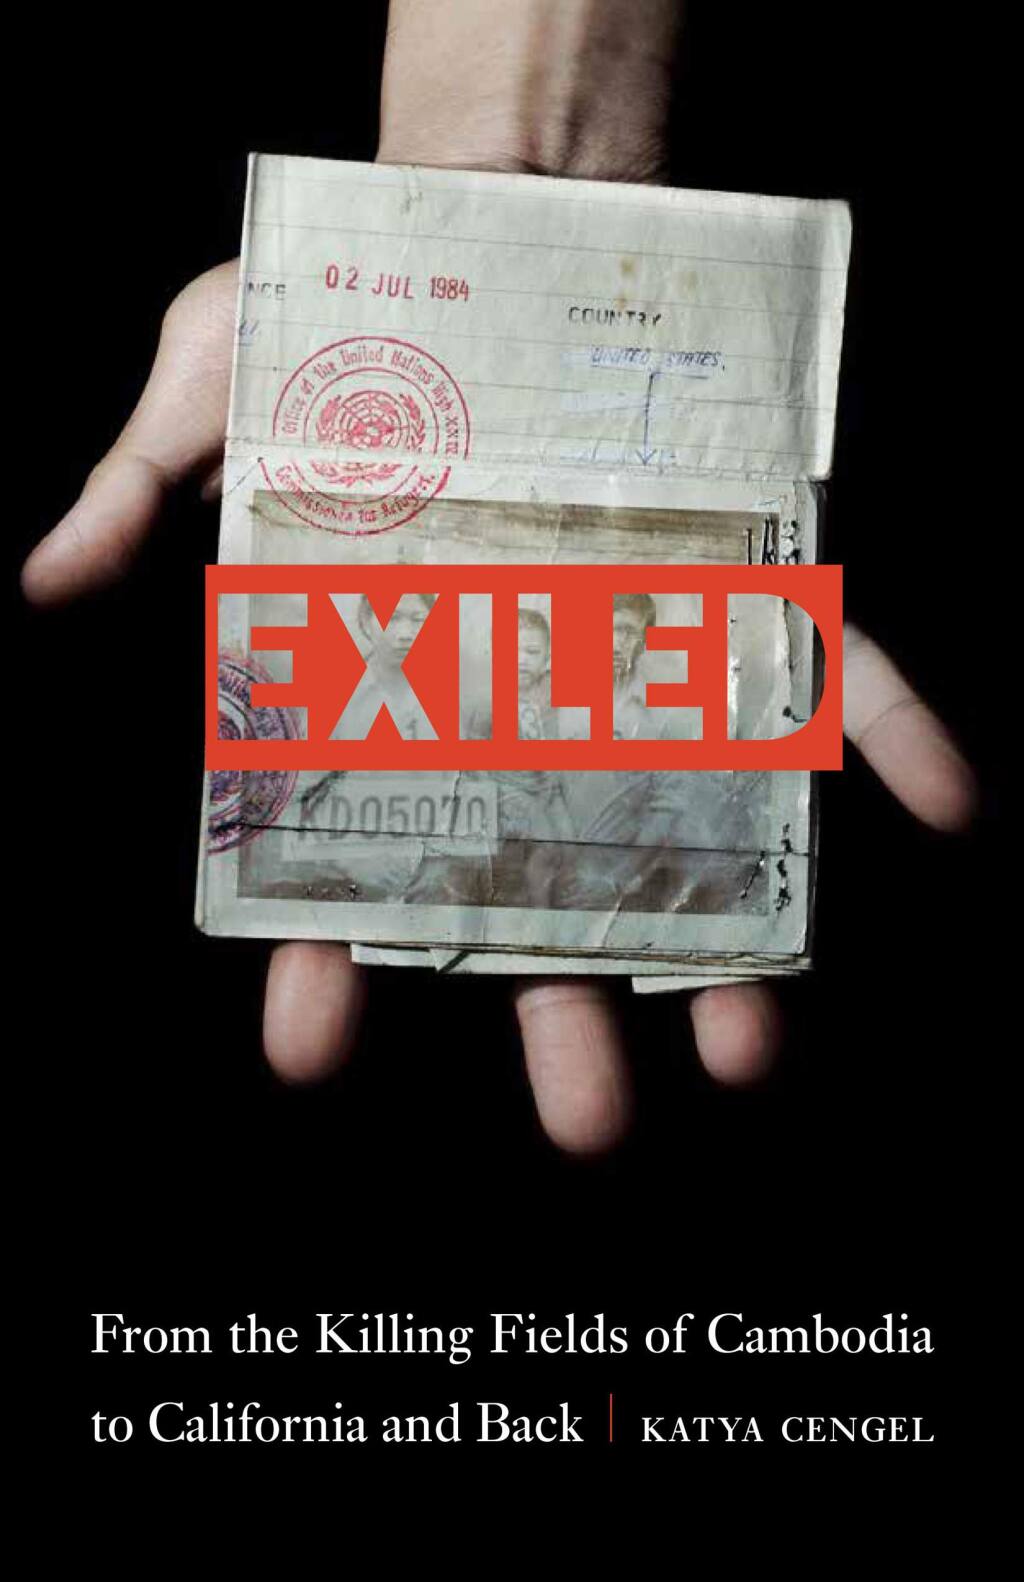 'Exiled' is the title of a new book by journalist Katya Cengel.